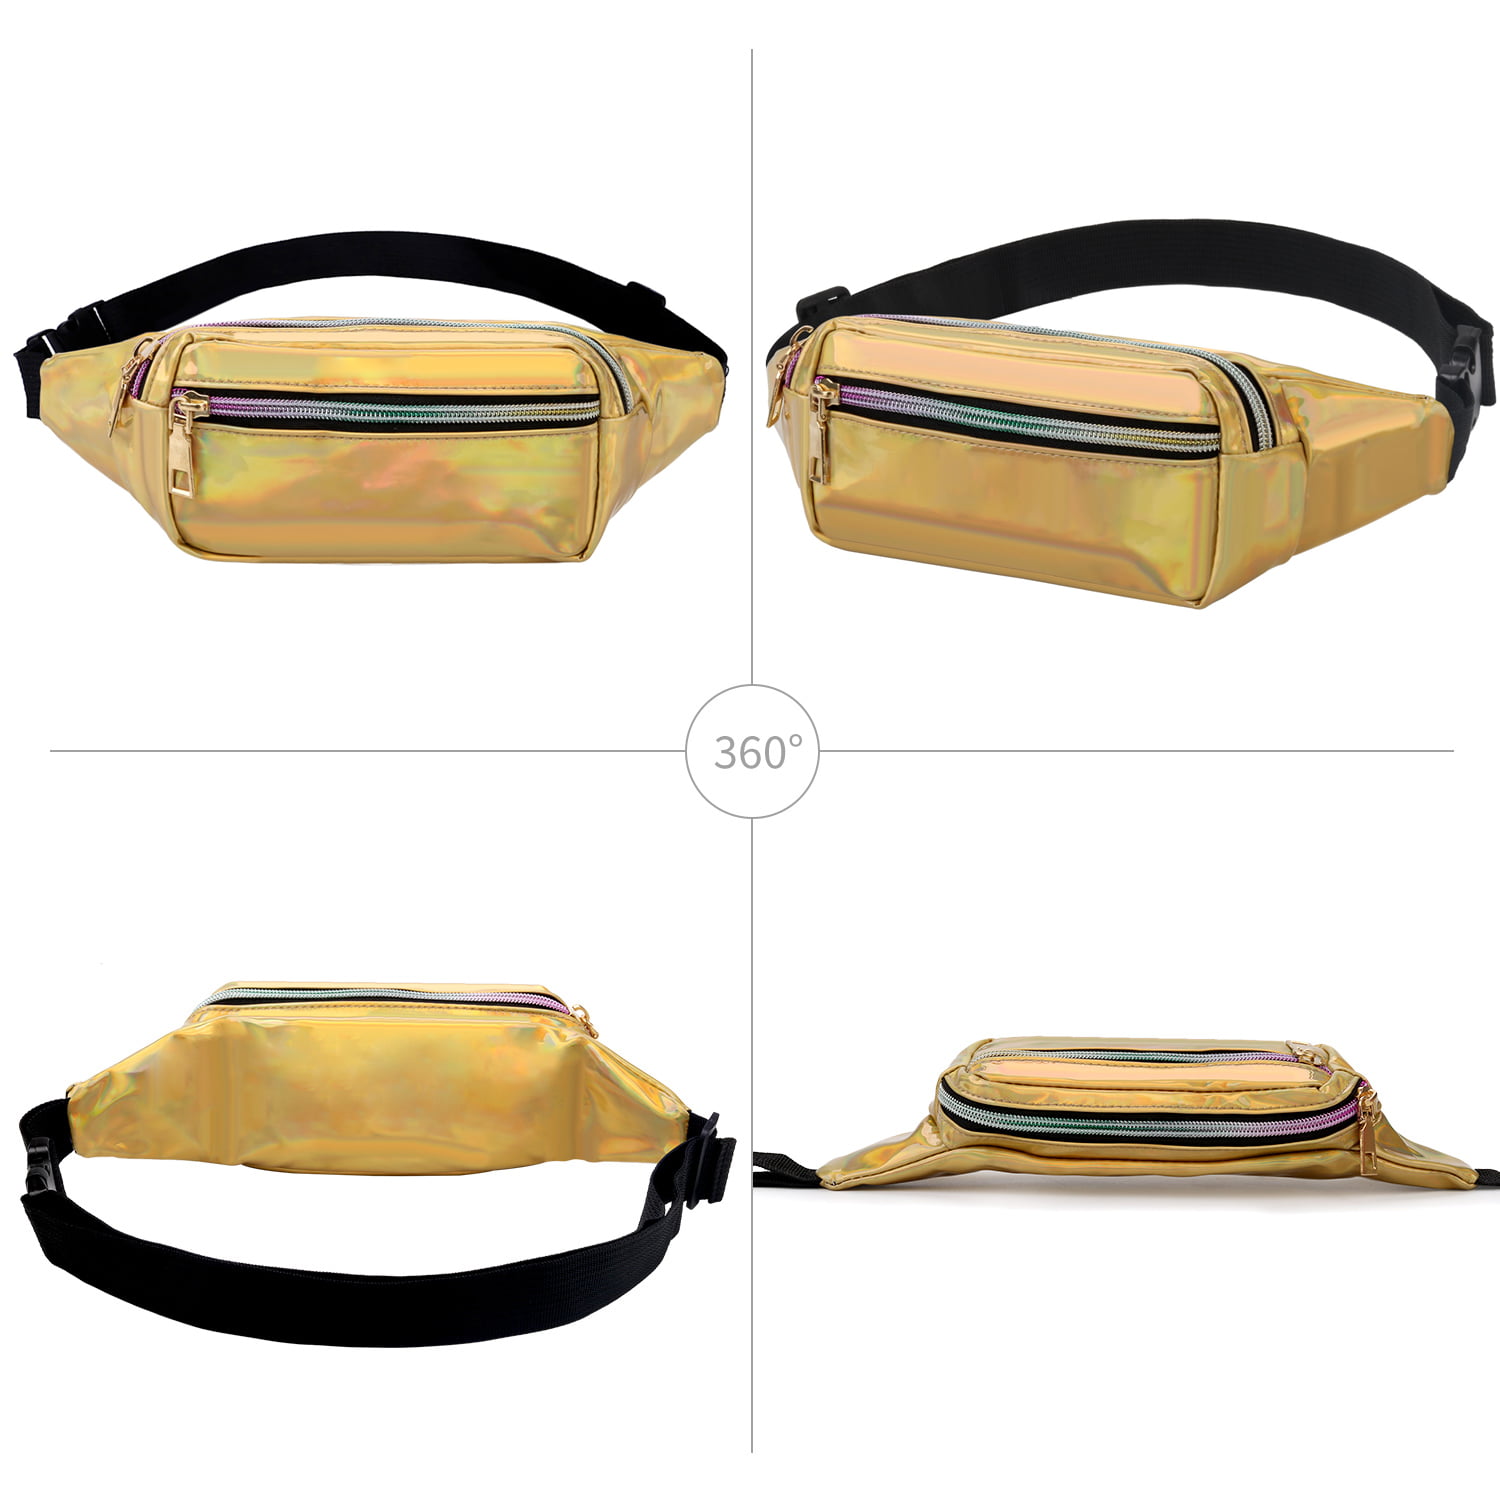 Waist Bag Fashion Adjustable Casual Portable Waist Pack Fanny Pack for Outdoor